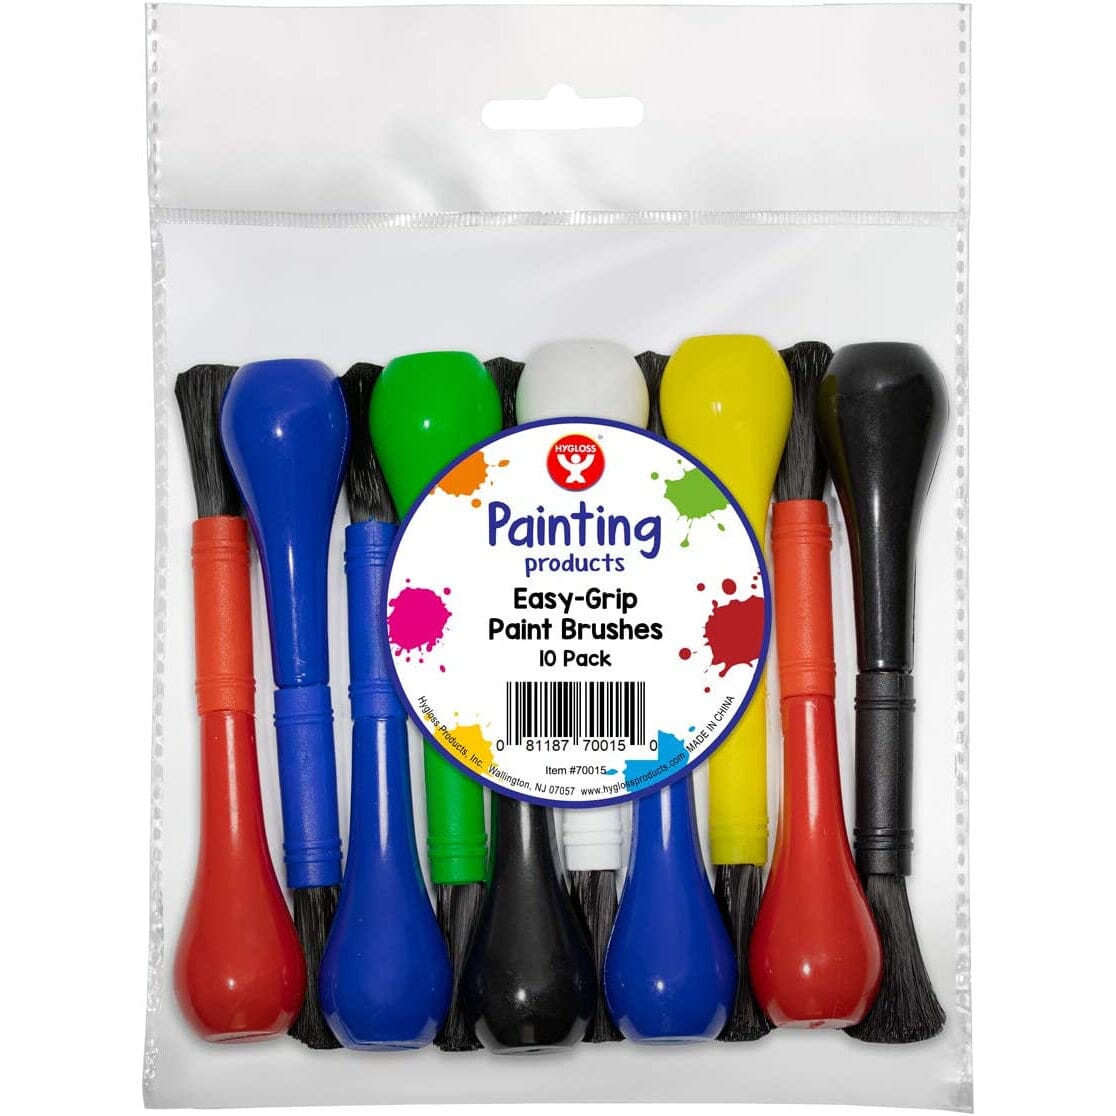 10 Pack Easy-Grip Paint Brushes (ARM-015) HyGloss